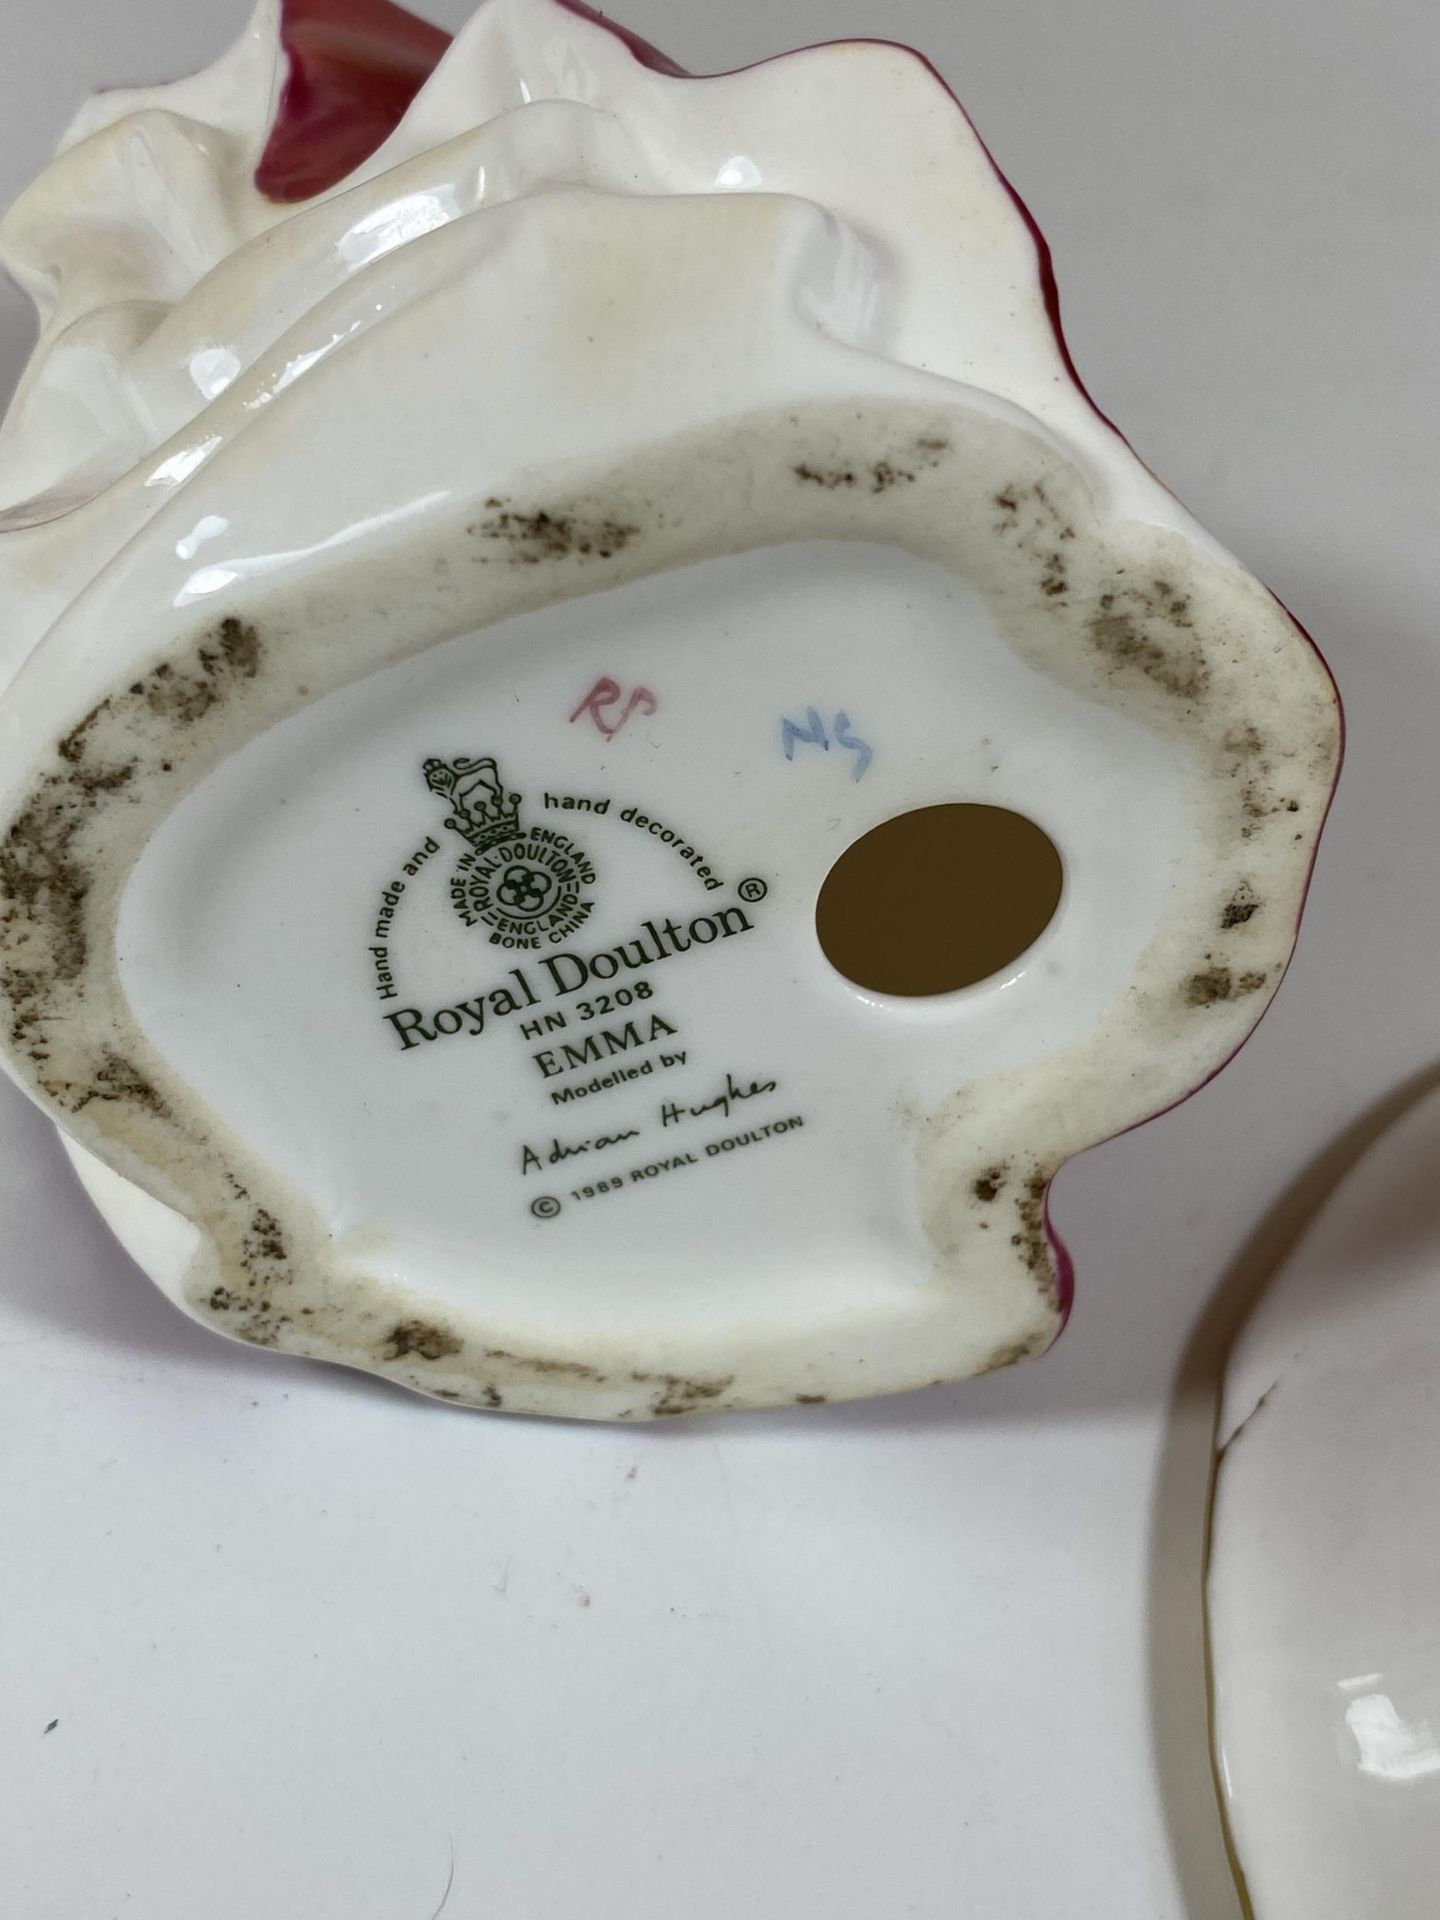 TWO ITEMS - A ROYAL CROWN DERBY IMARI A962 PATTERN DISH AND A ROYAL DOULTON 'EMMA' HN3208 FIGURE - Image 6 of 8